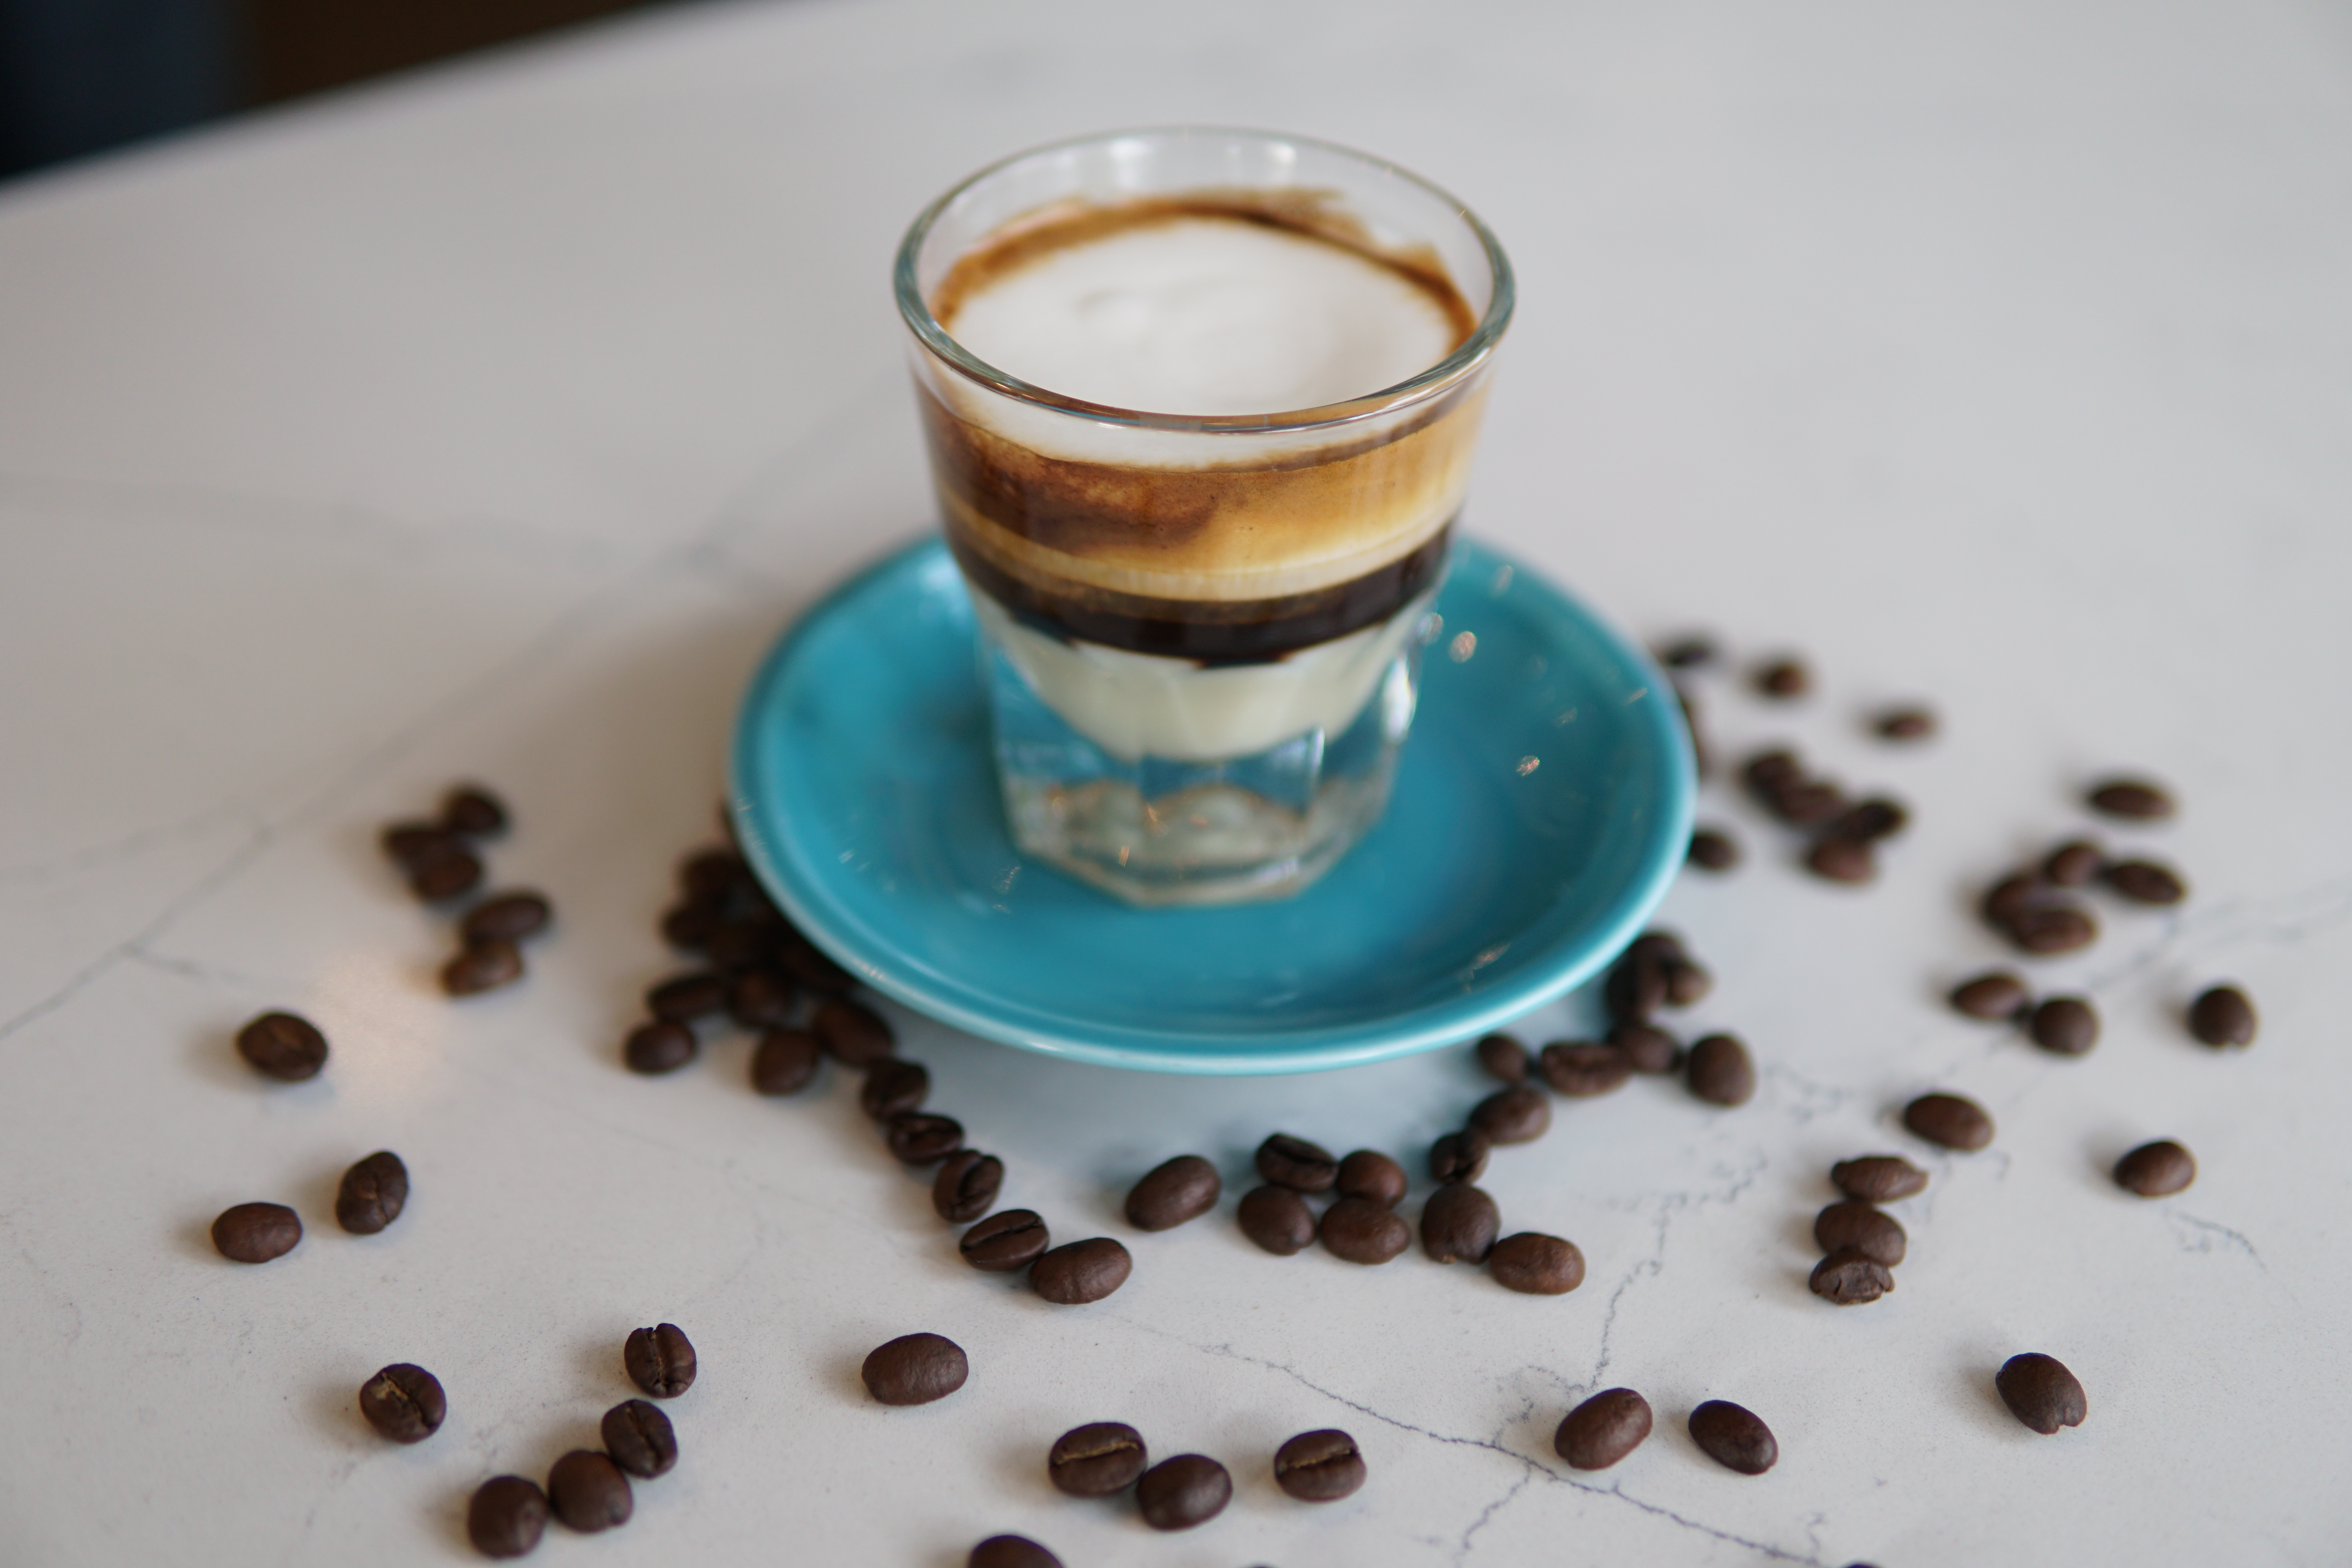 Cuban coffee is served in a small glass cup.